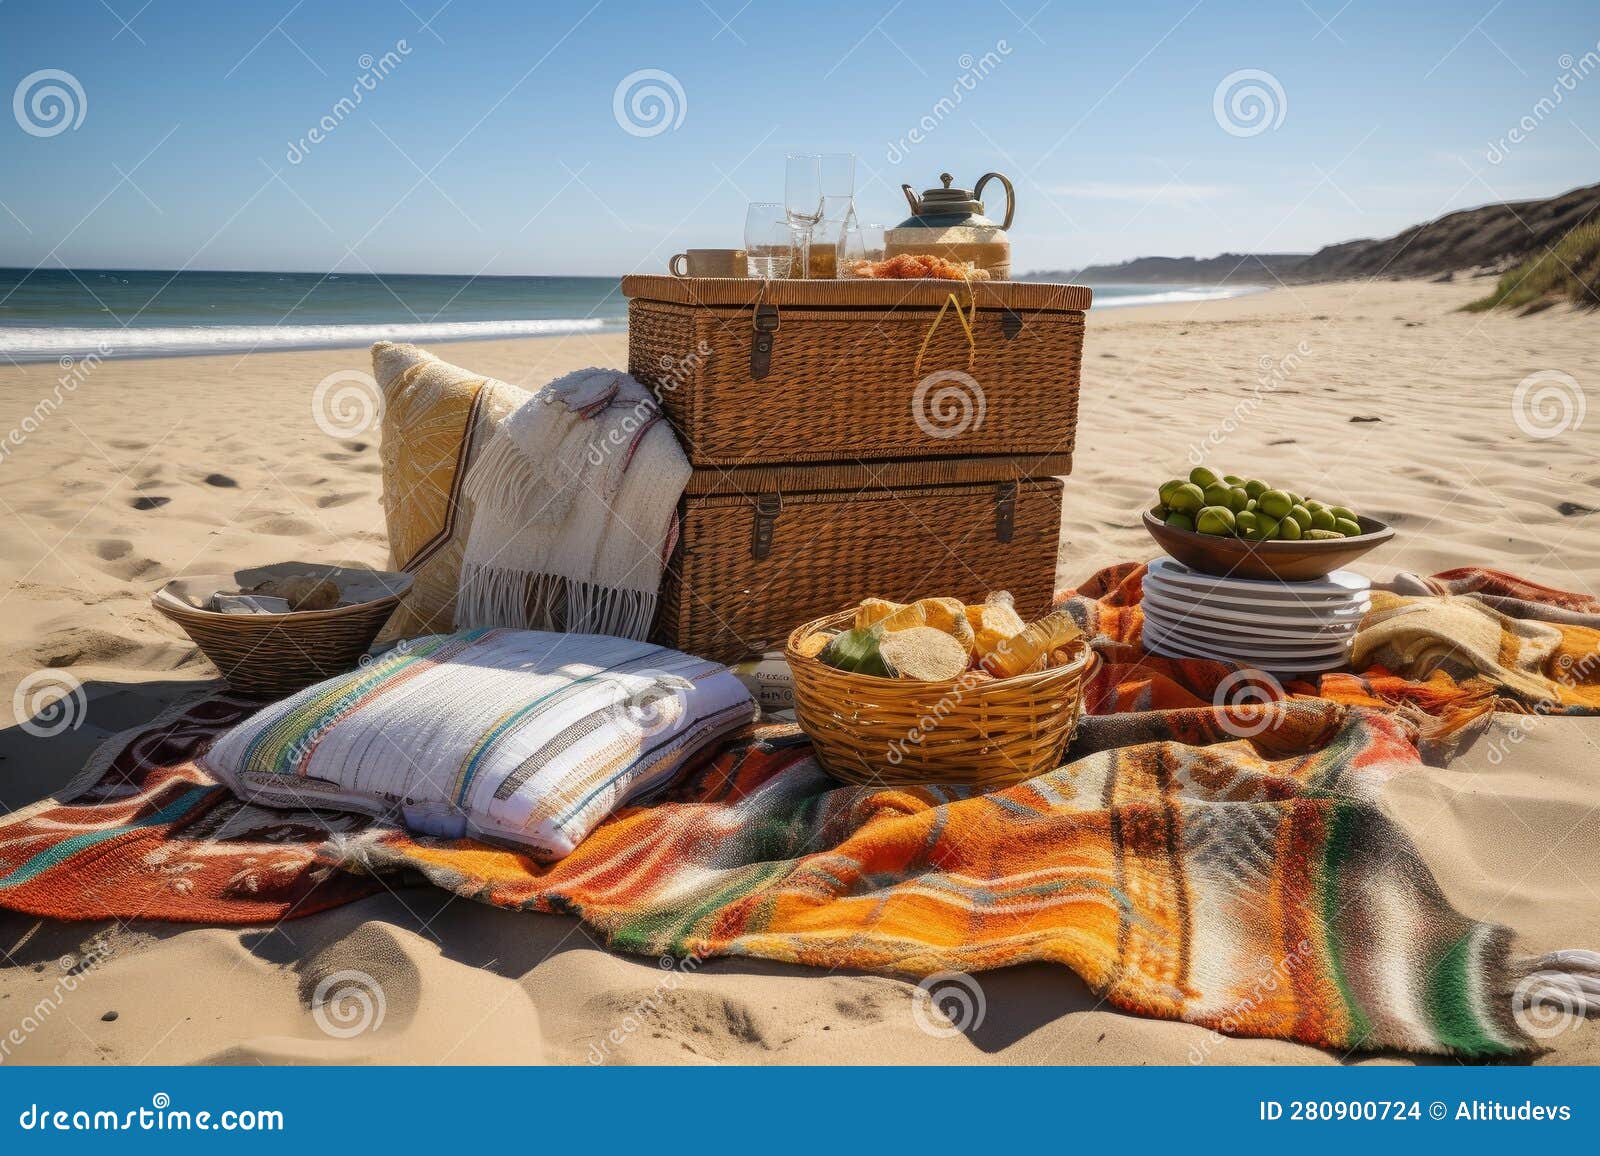 Picnic Basket and Blanket Spread Out on a Sunny Beach Stock Photo ...